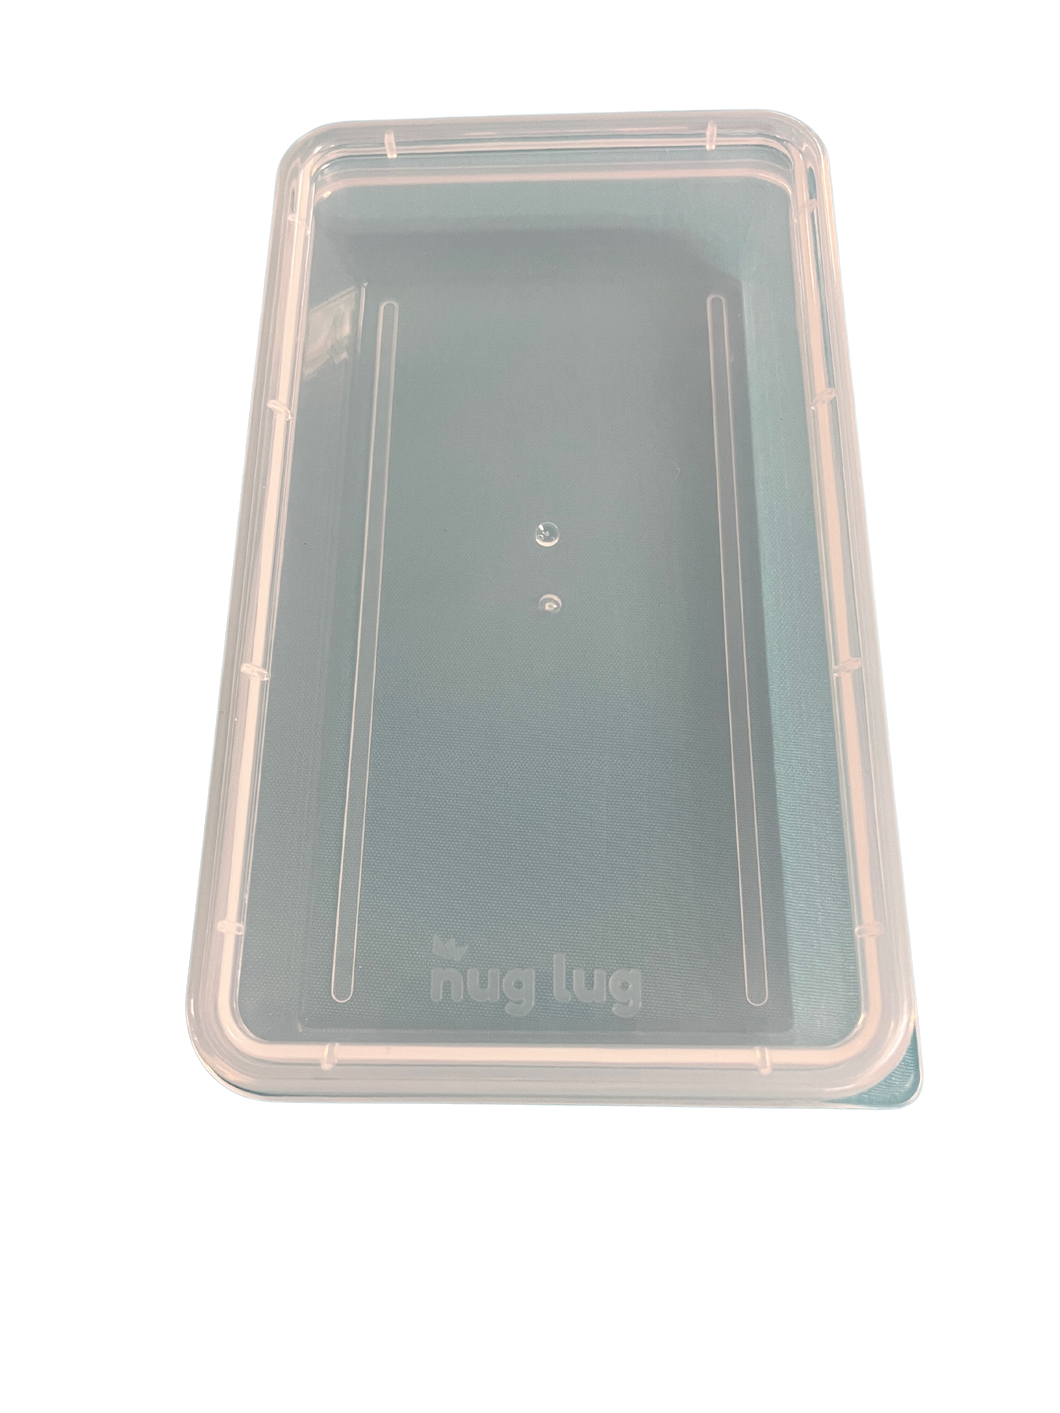 NugLug System Interchangeable Container- Large